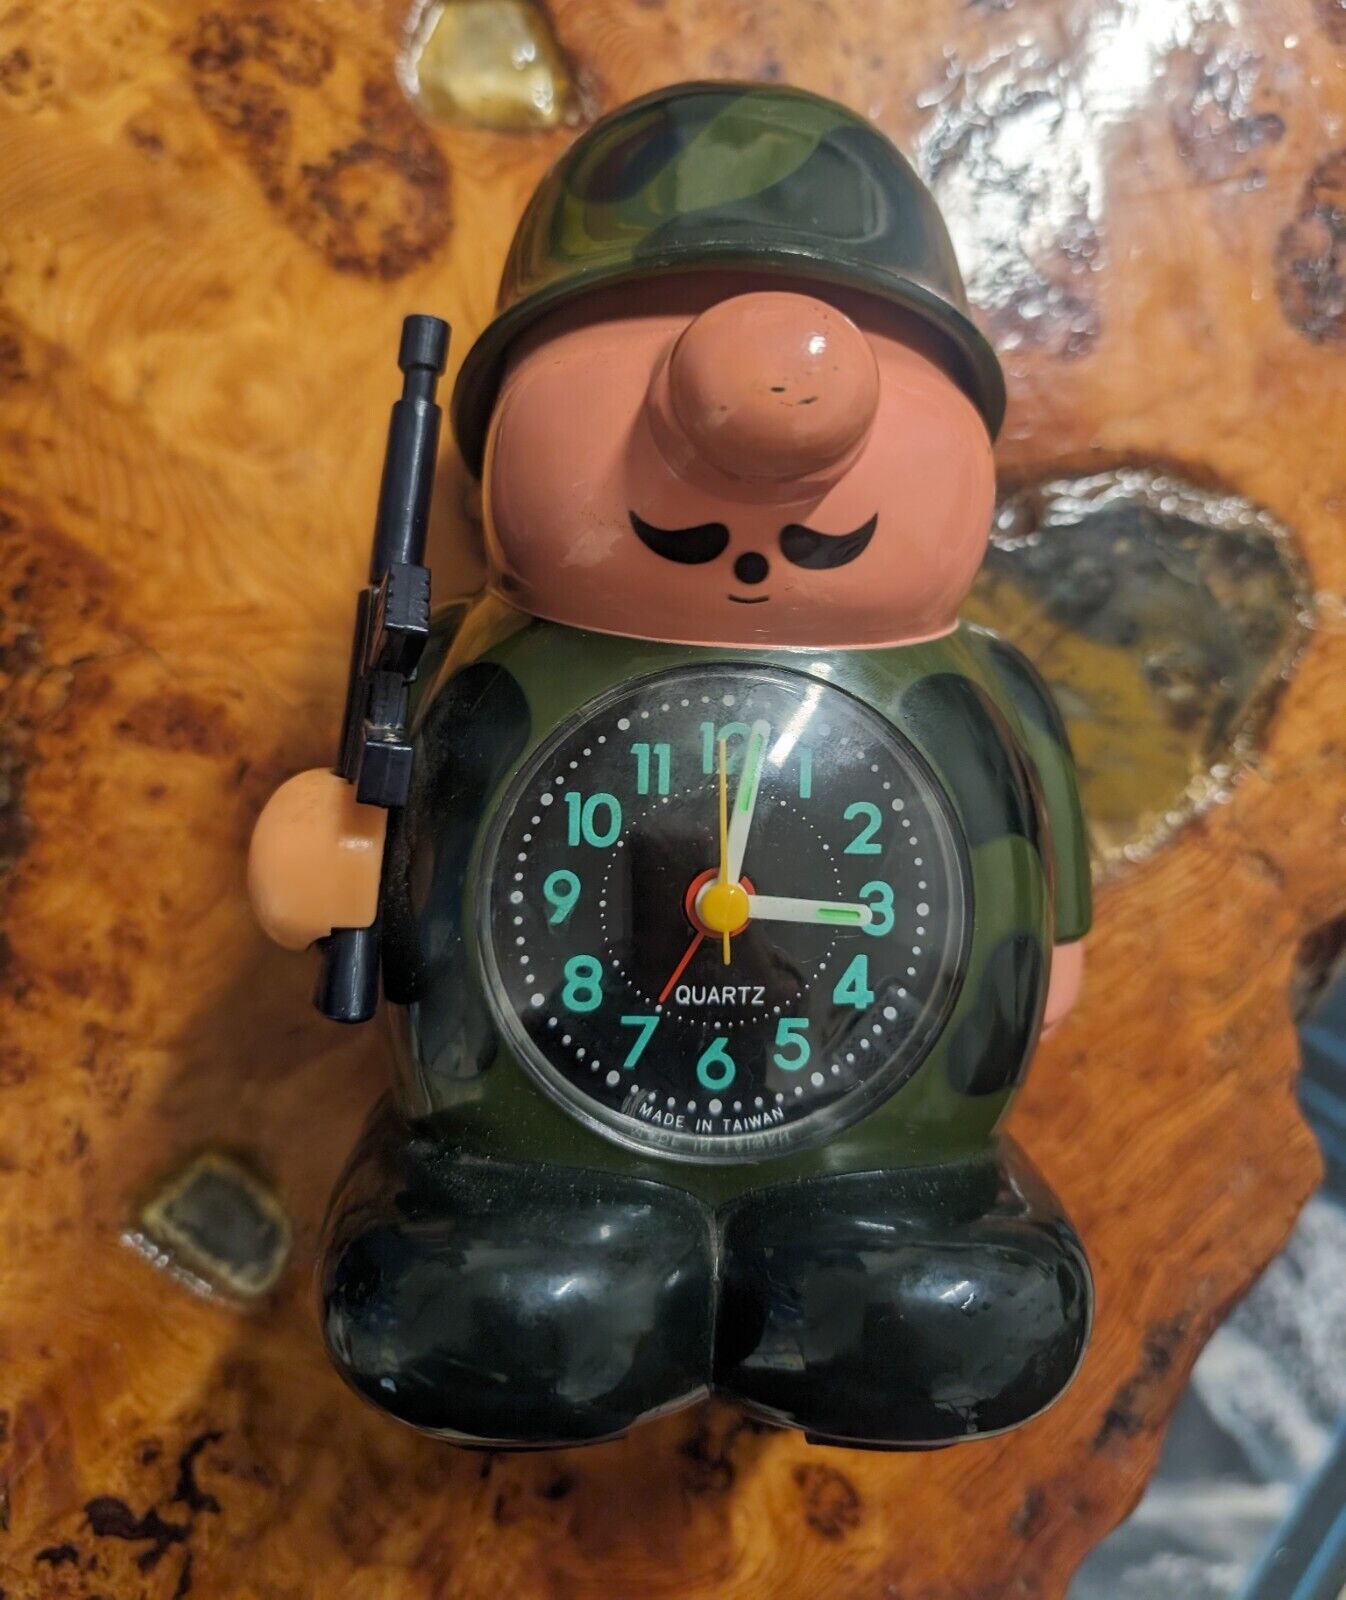 Vintage 80's Telstar Mr. General Army Soldier Alarm Clock, Tested Missing a Part